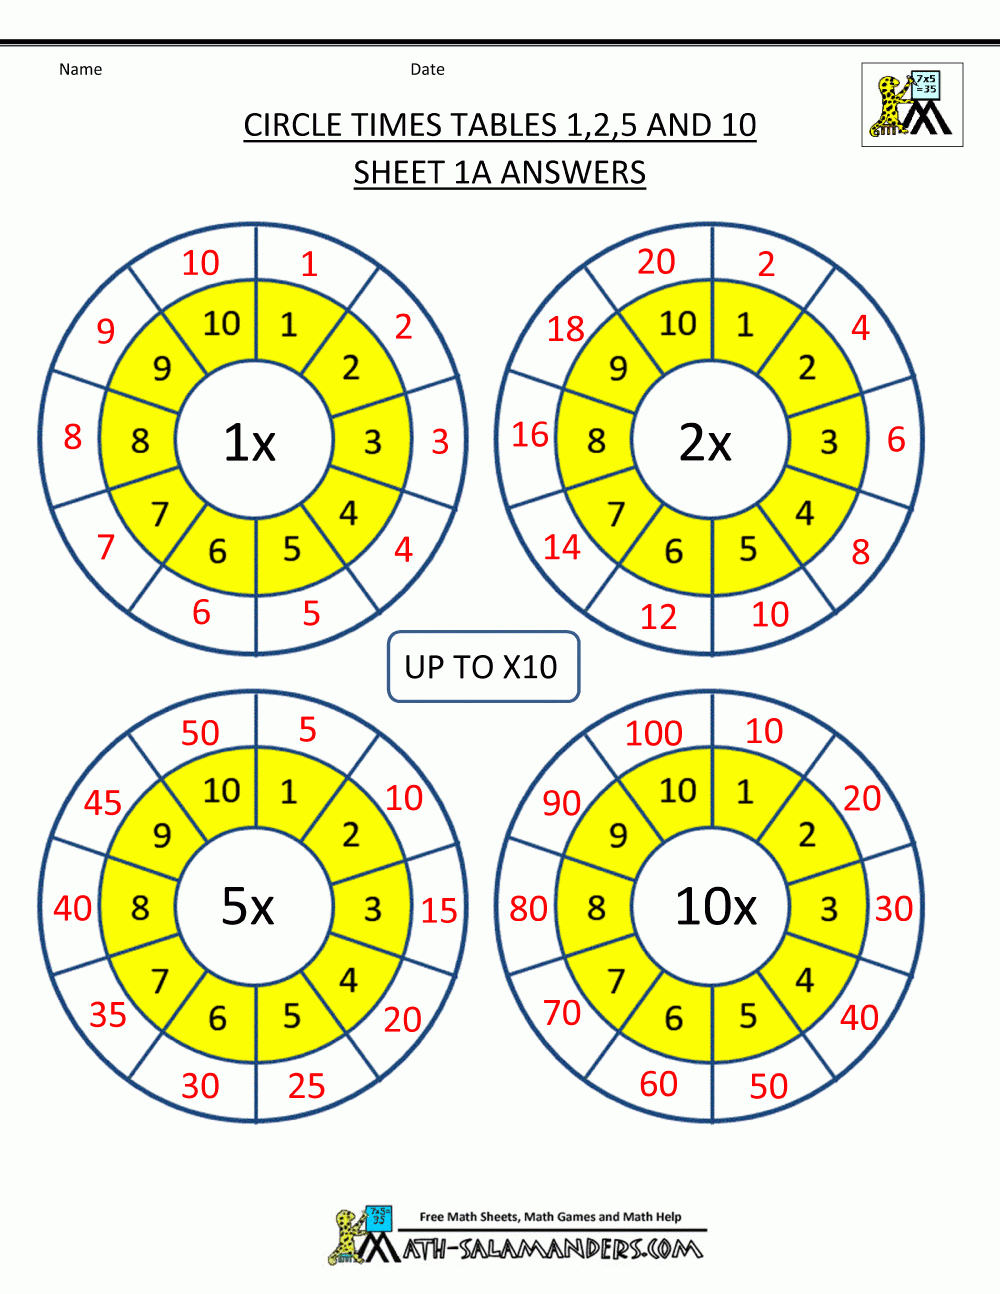 Times Tables Worksheets Circles 1 To 10 Times Tables throughout Printable Multiplication Table 1-10 Pdf